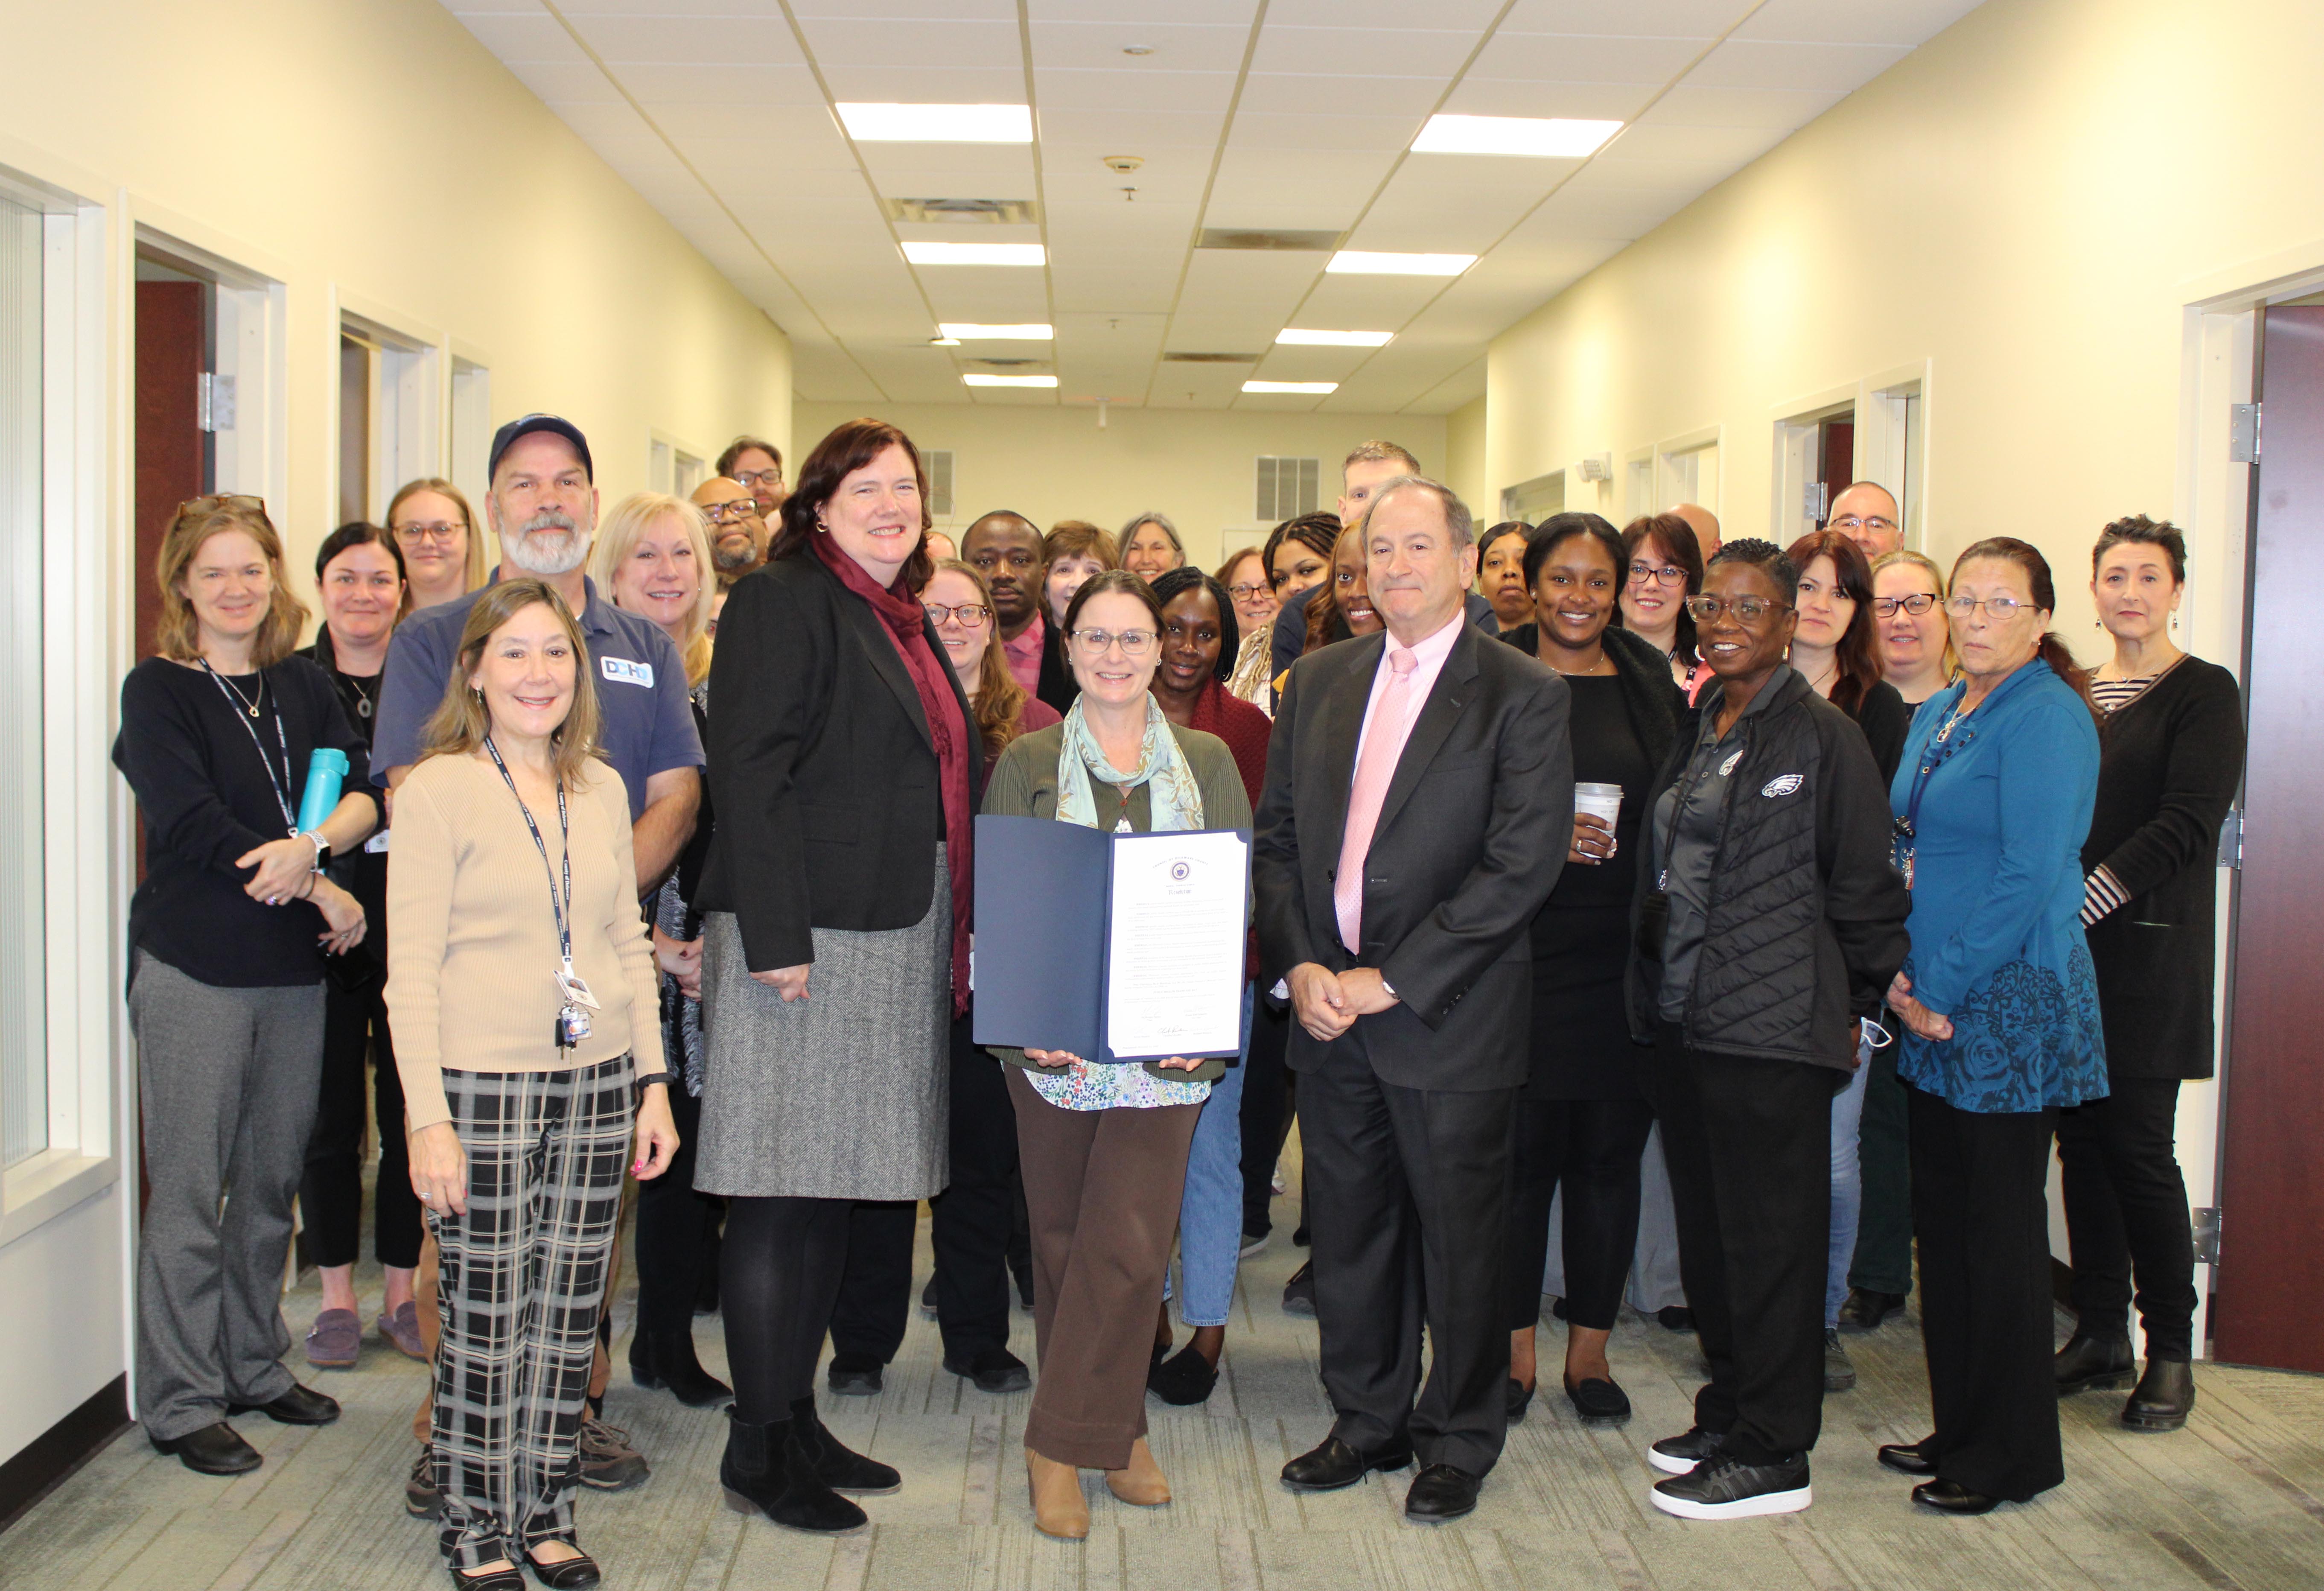 Members of the Delaware County Well being Division Acknowledged for “Public Well being Thank You Day”